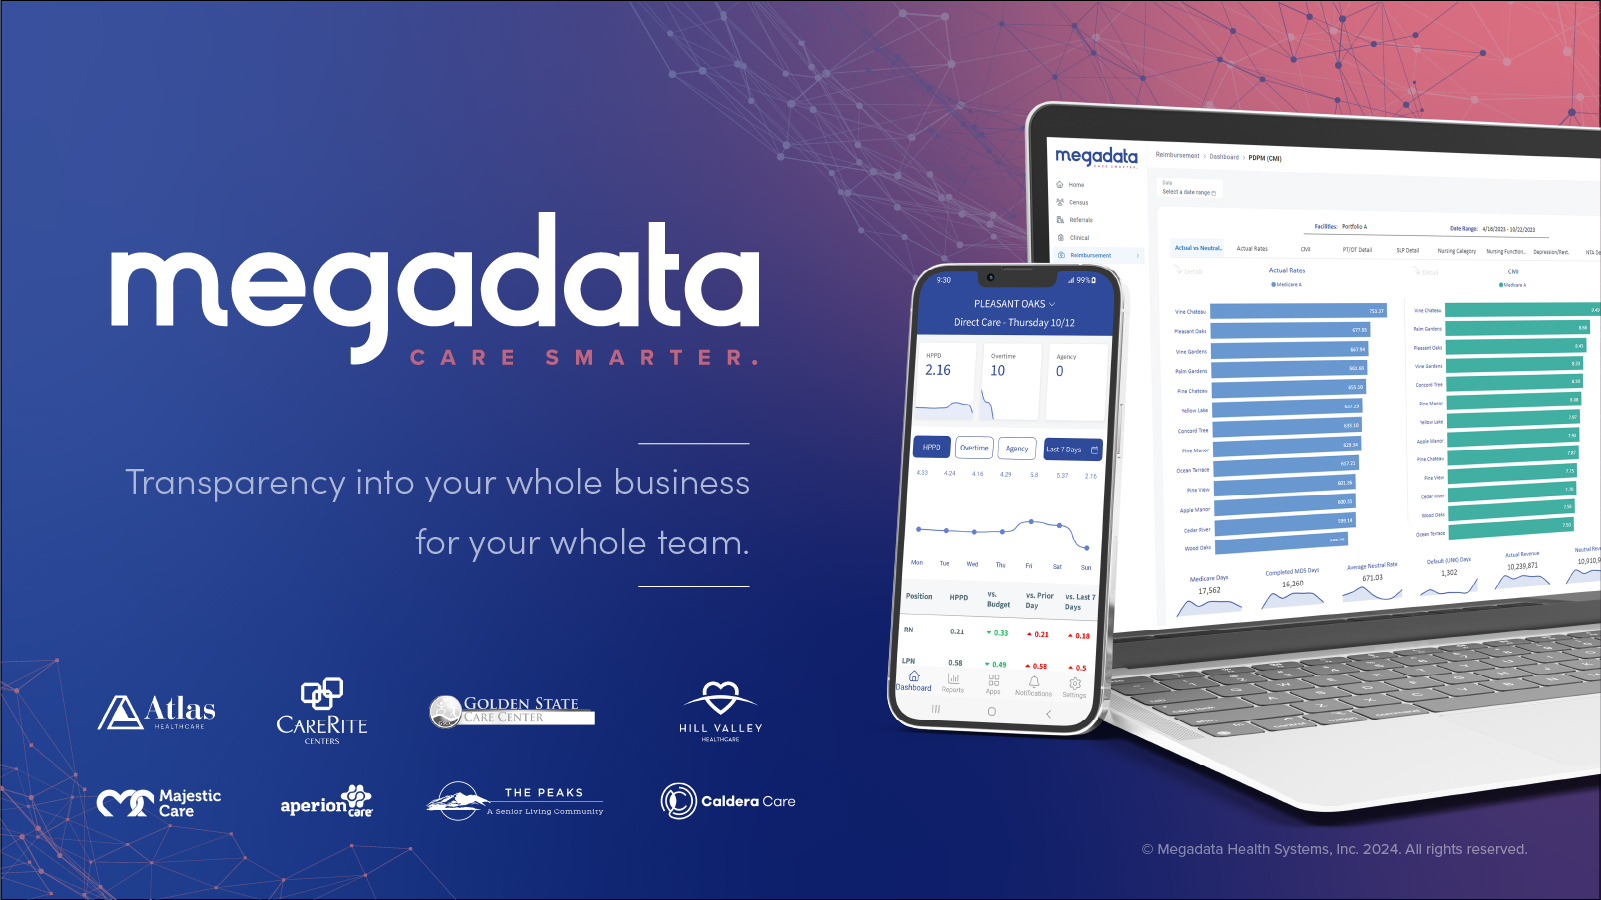 Welcome to Megadata, the most comprehensive data analytics platform available to the long-term care market.